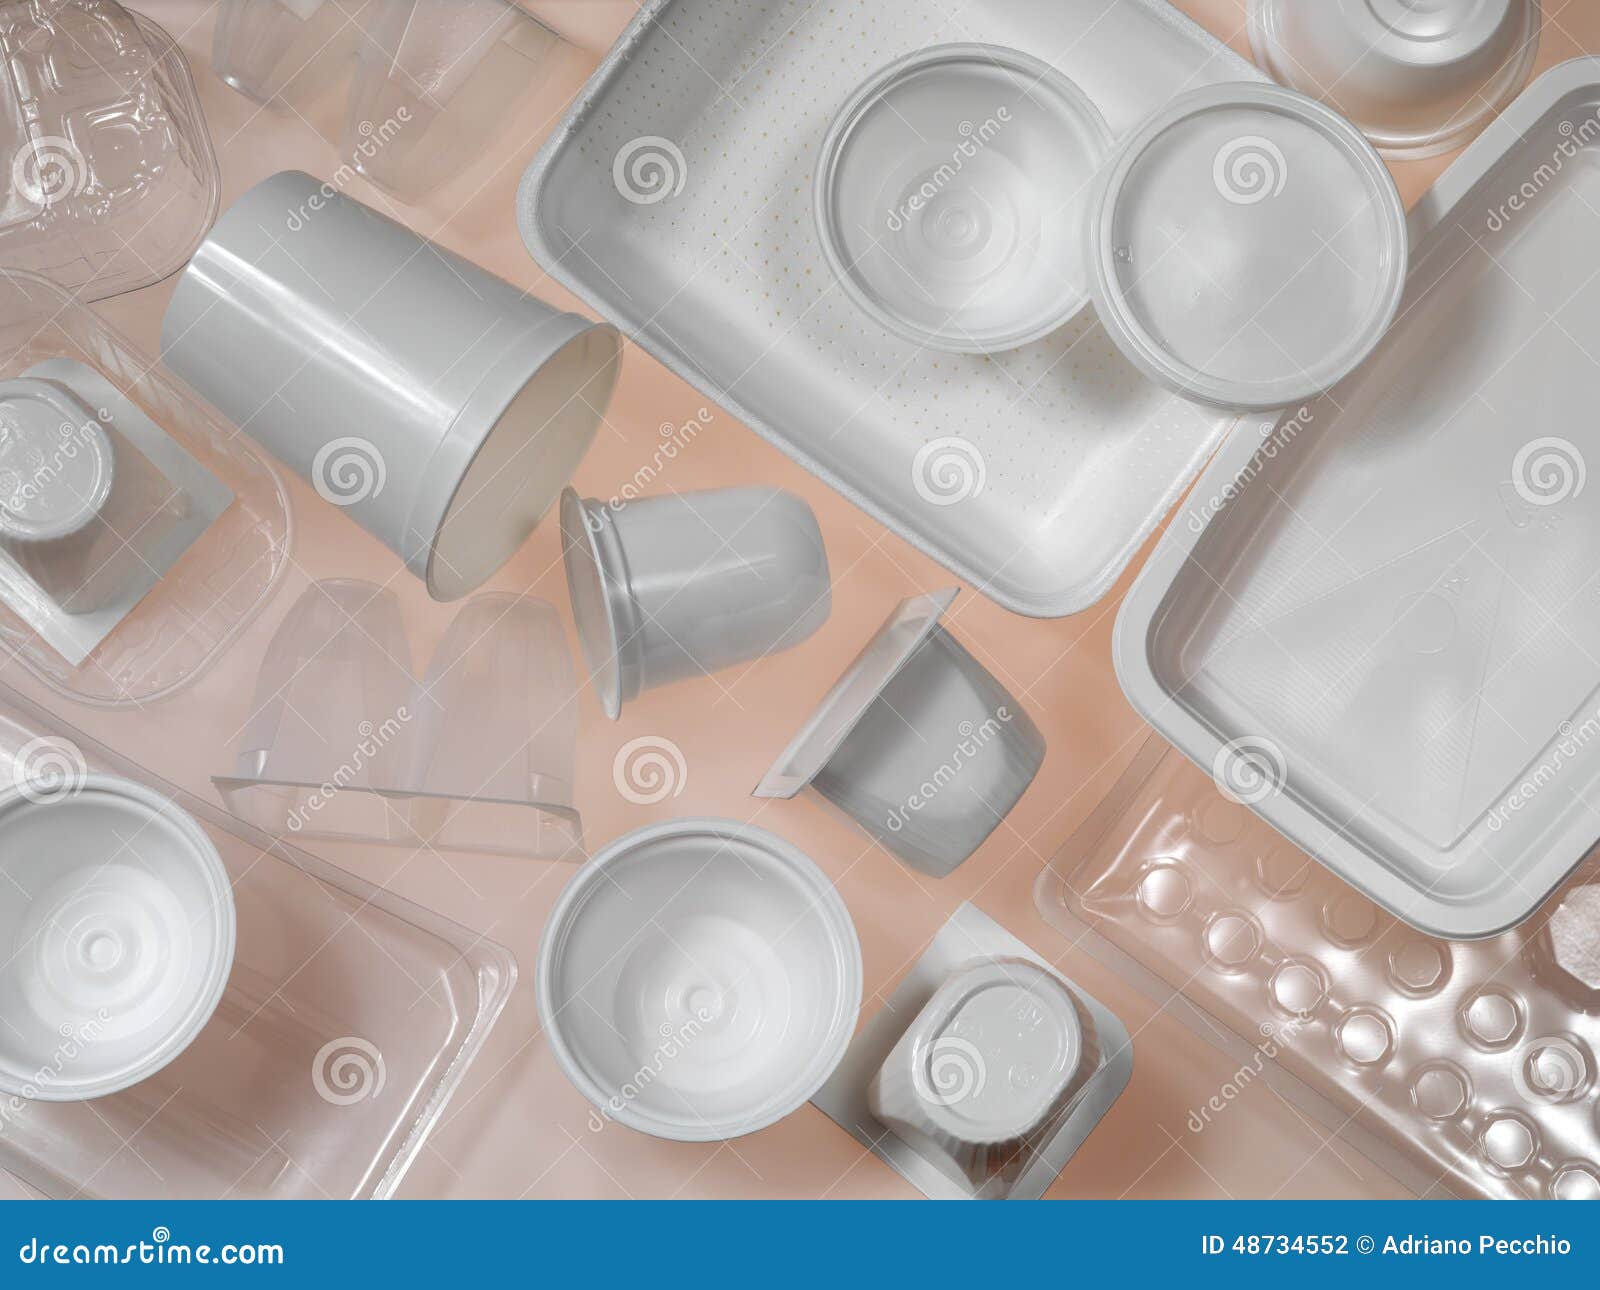 containers of plastic and polystyrene